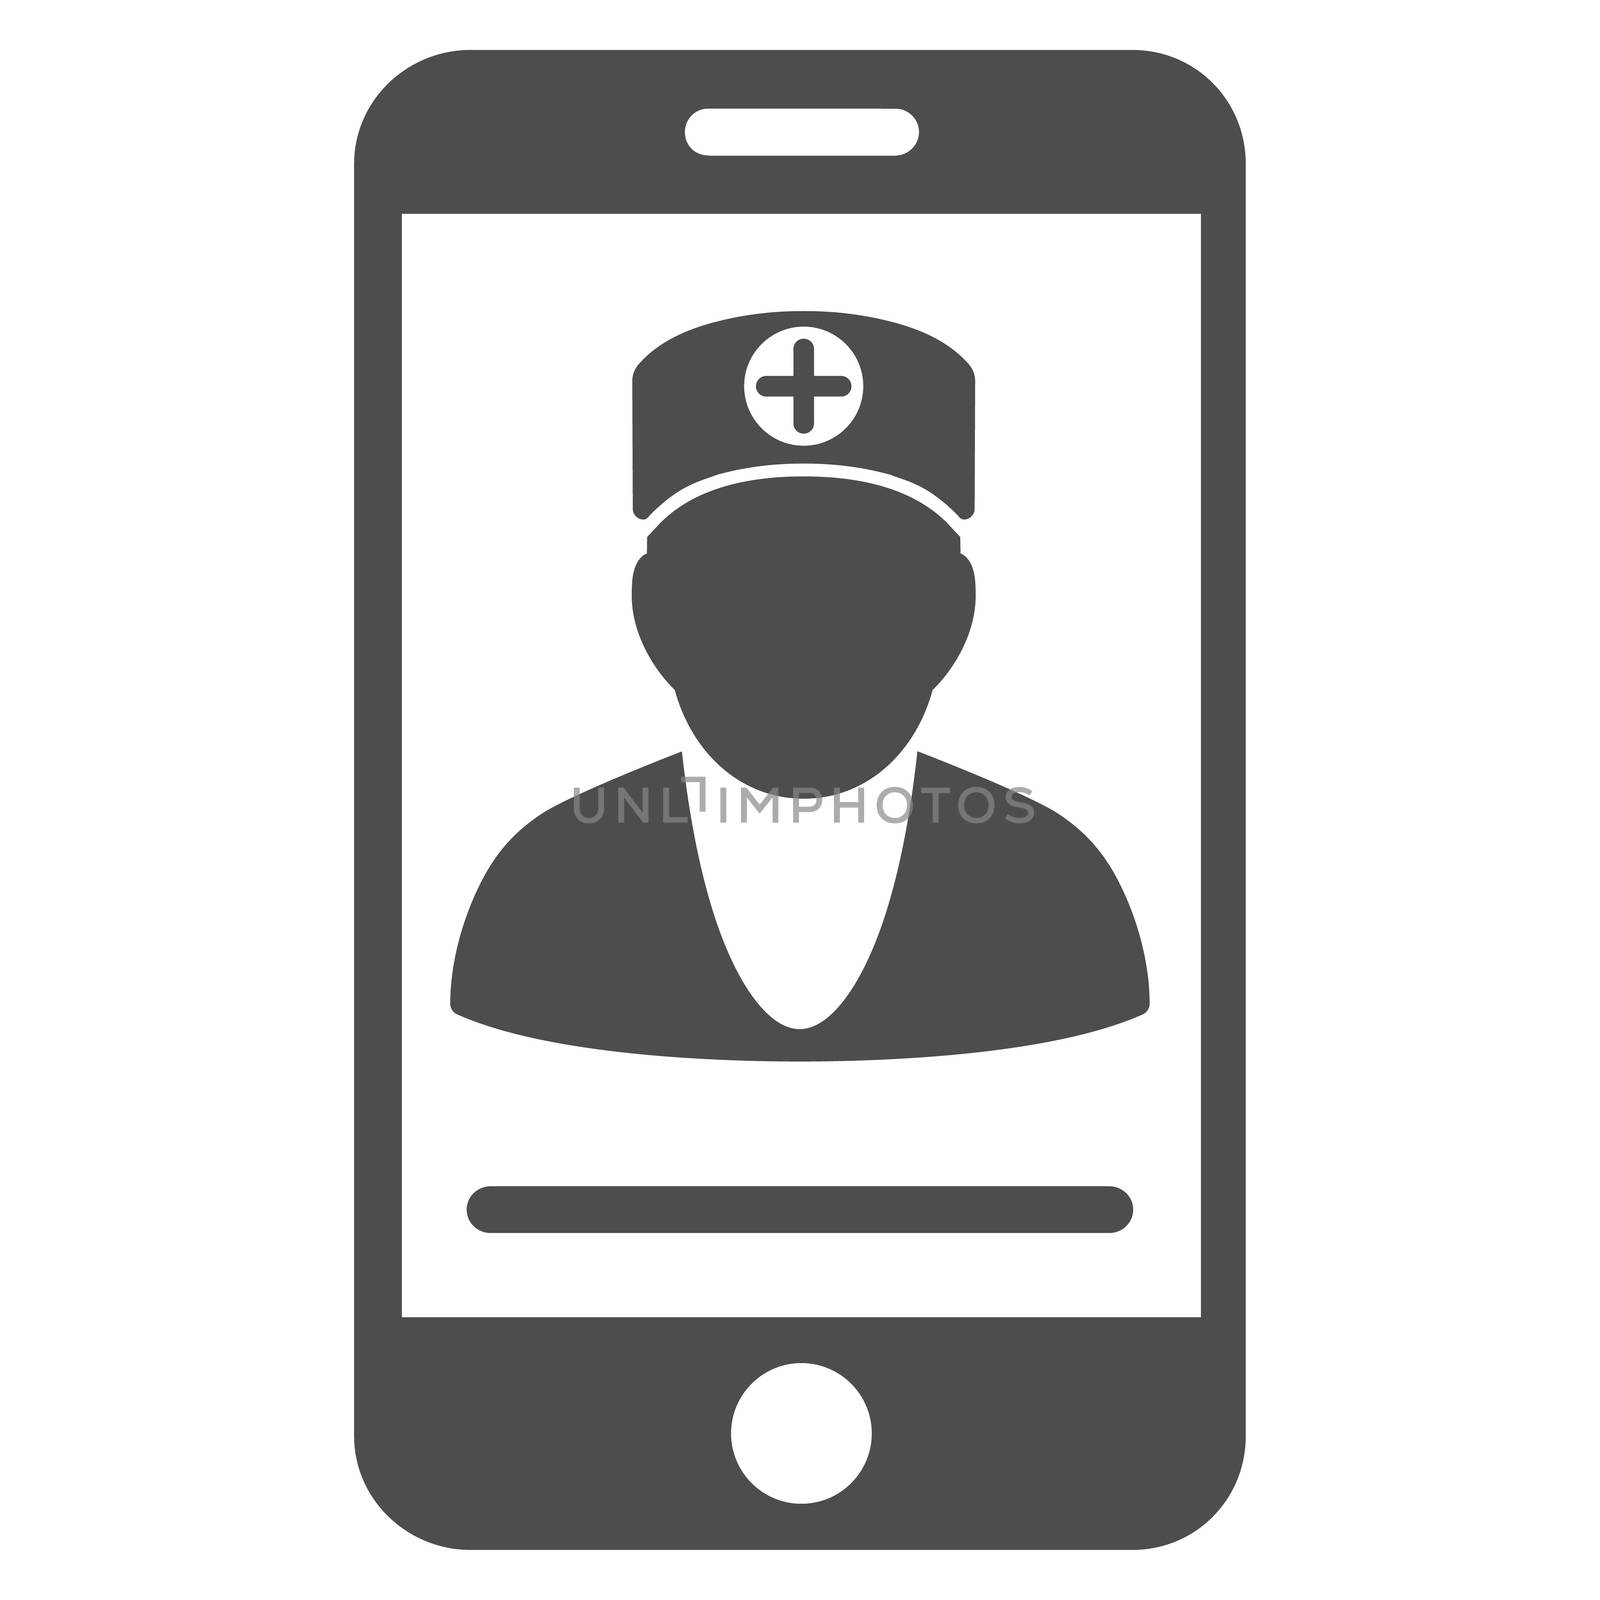 Online Doctor raster icon. Style is flat symbol, gray color, rounded angles, white background.